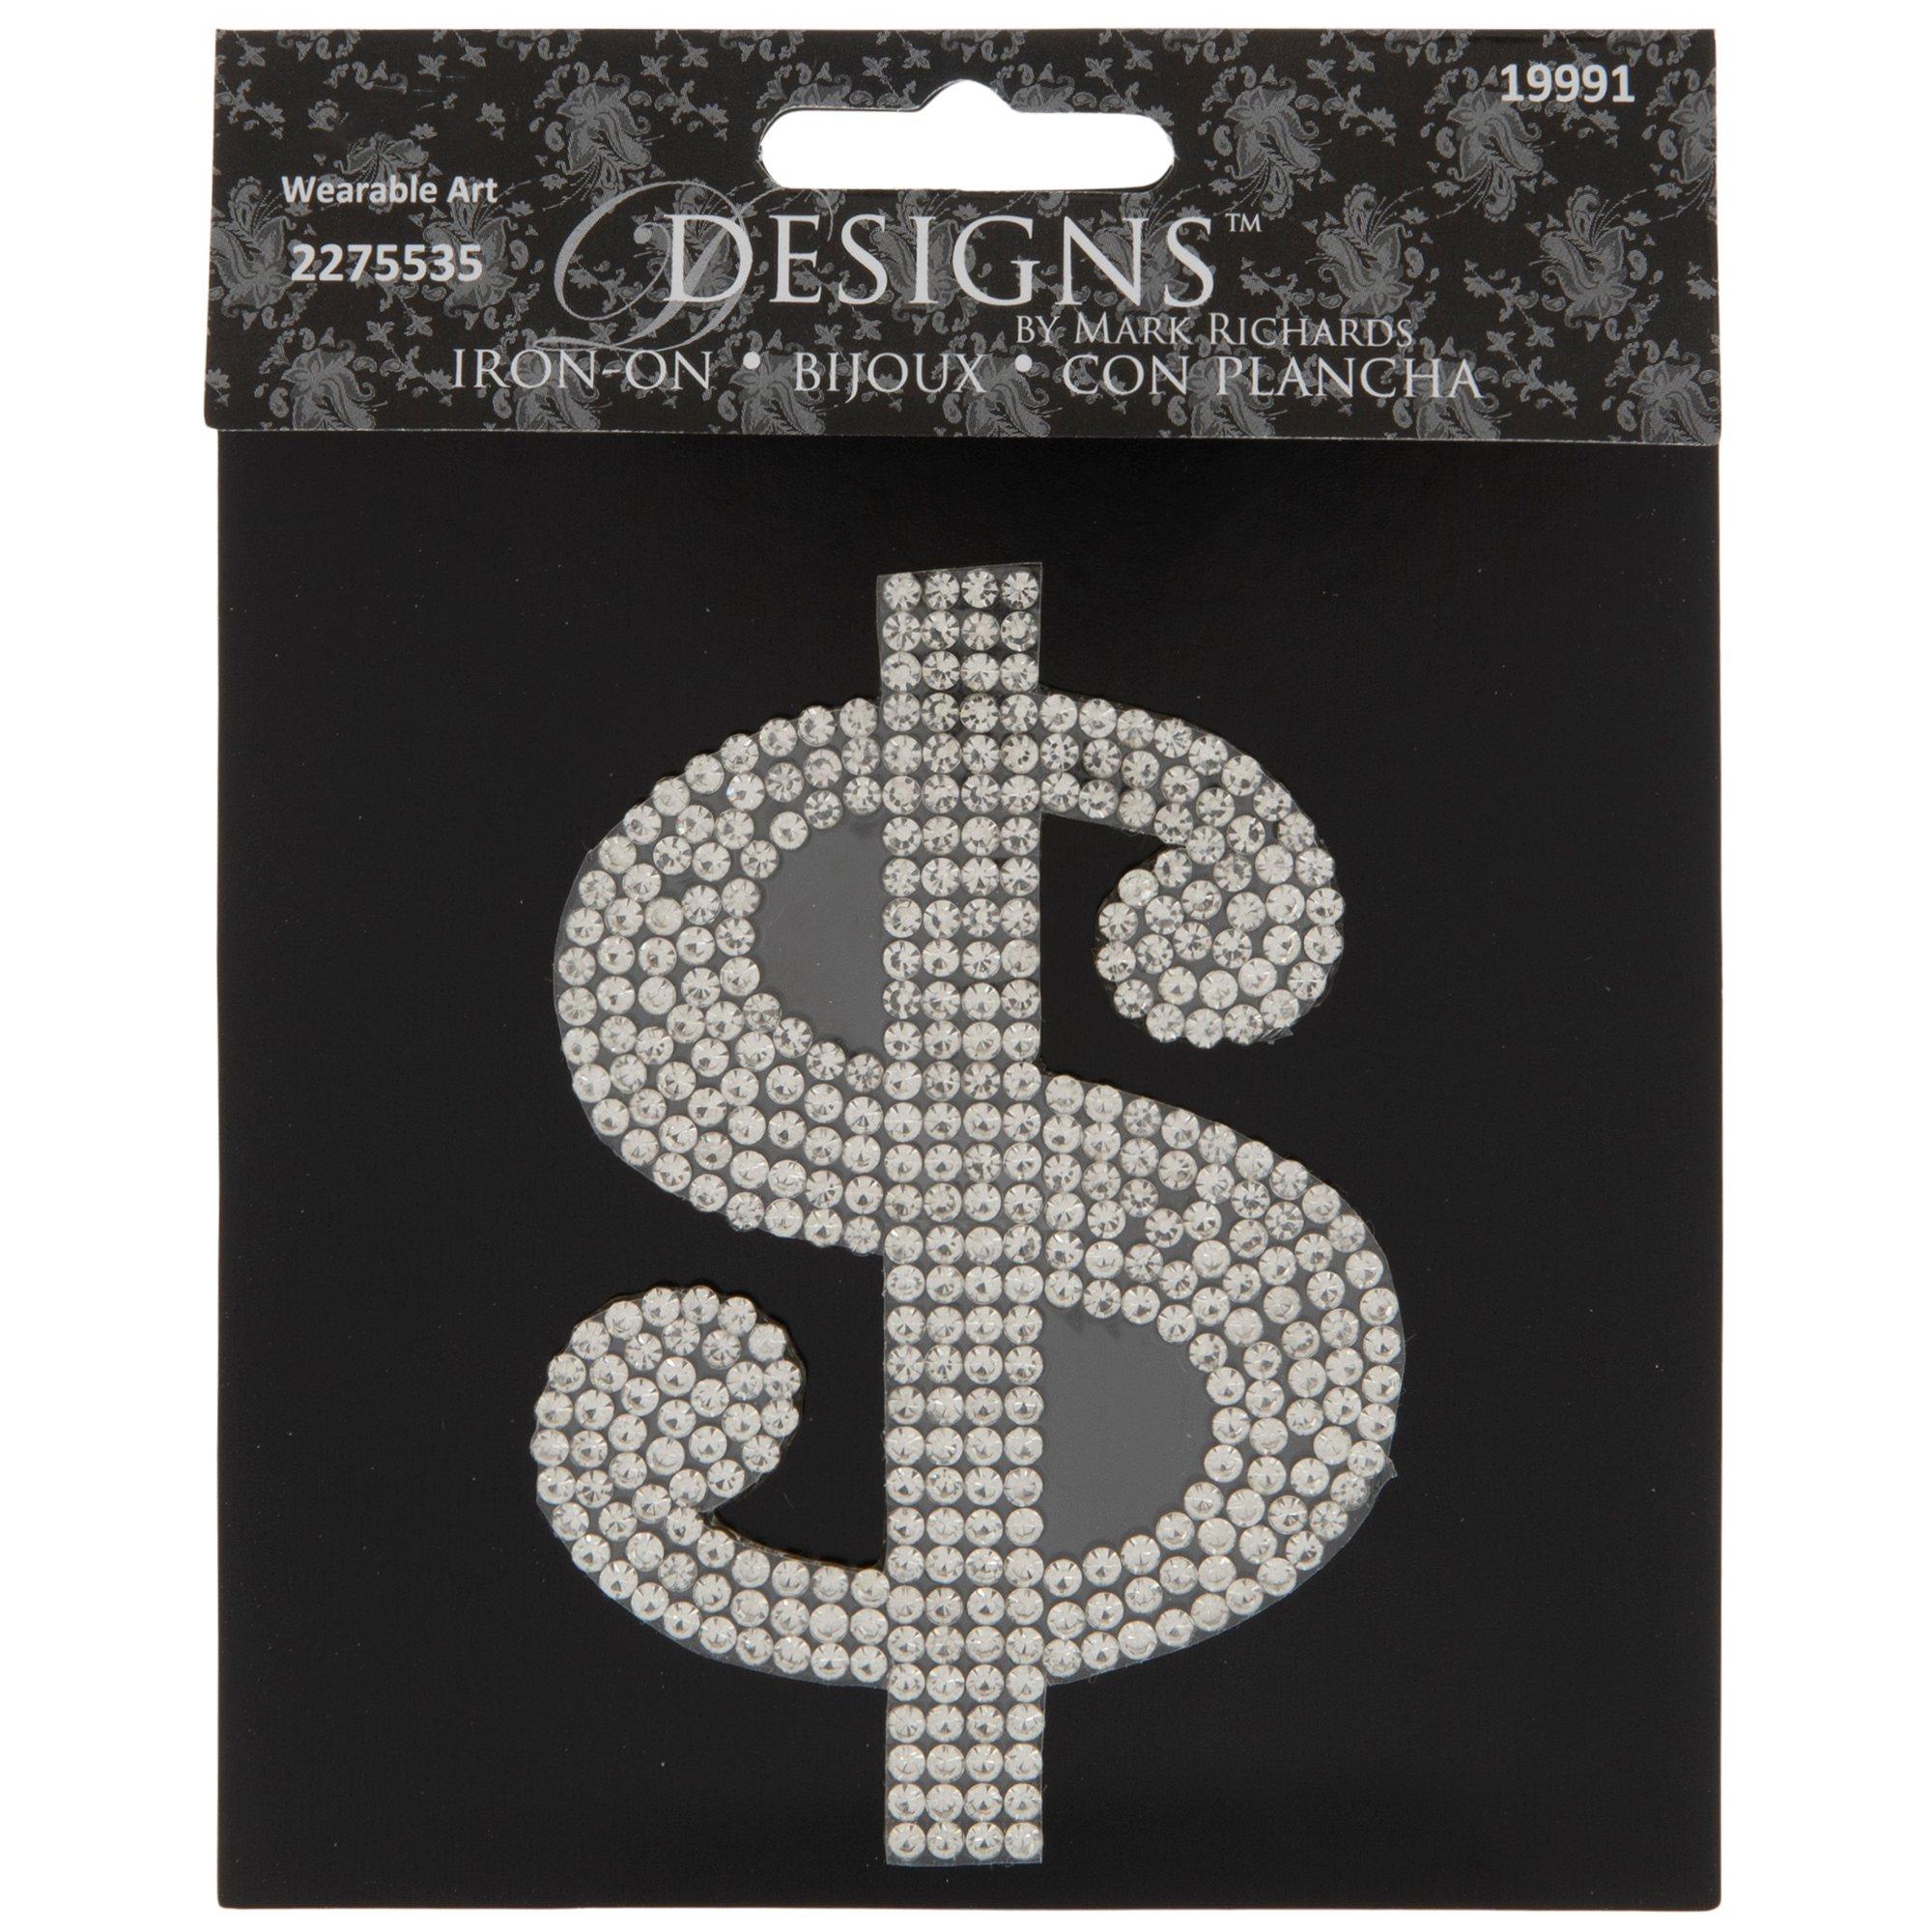 Rhinestone Dollar Sign ($) Pin | Multi Color | Safety Pins by PinMart